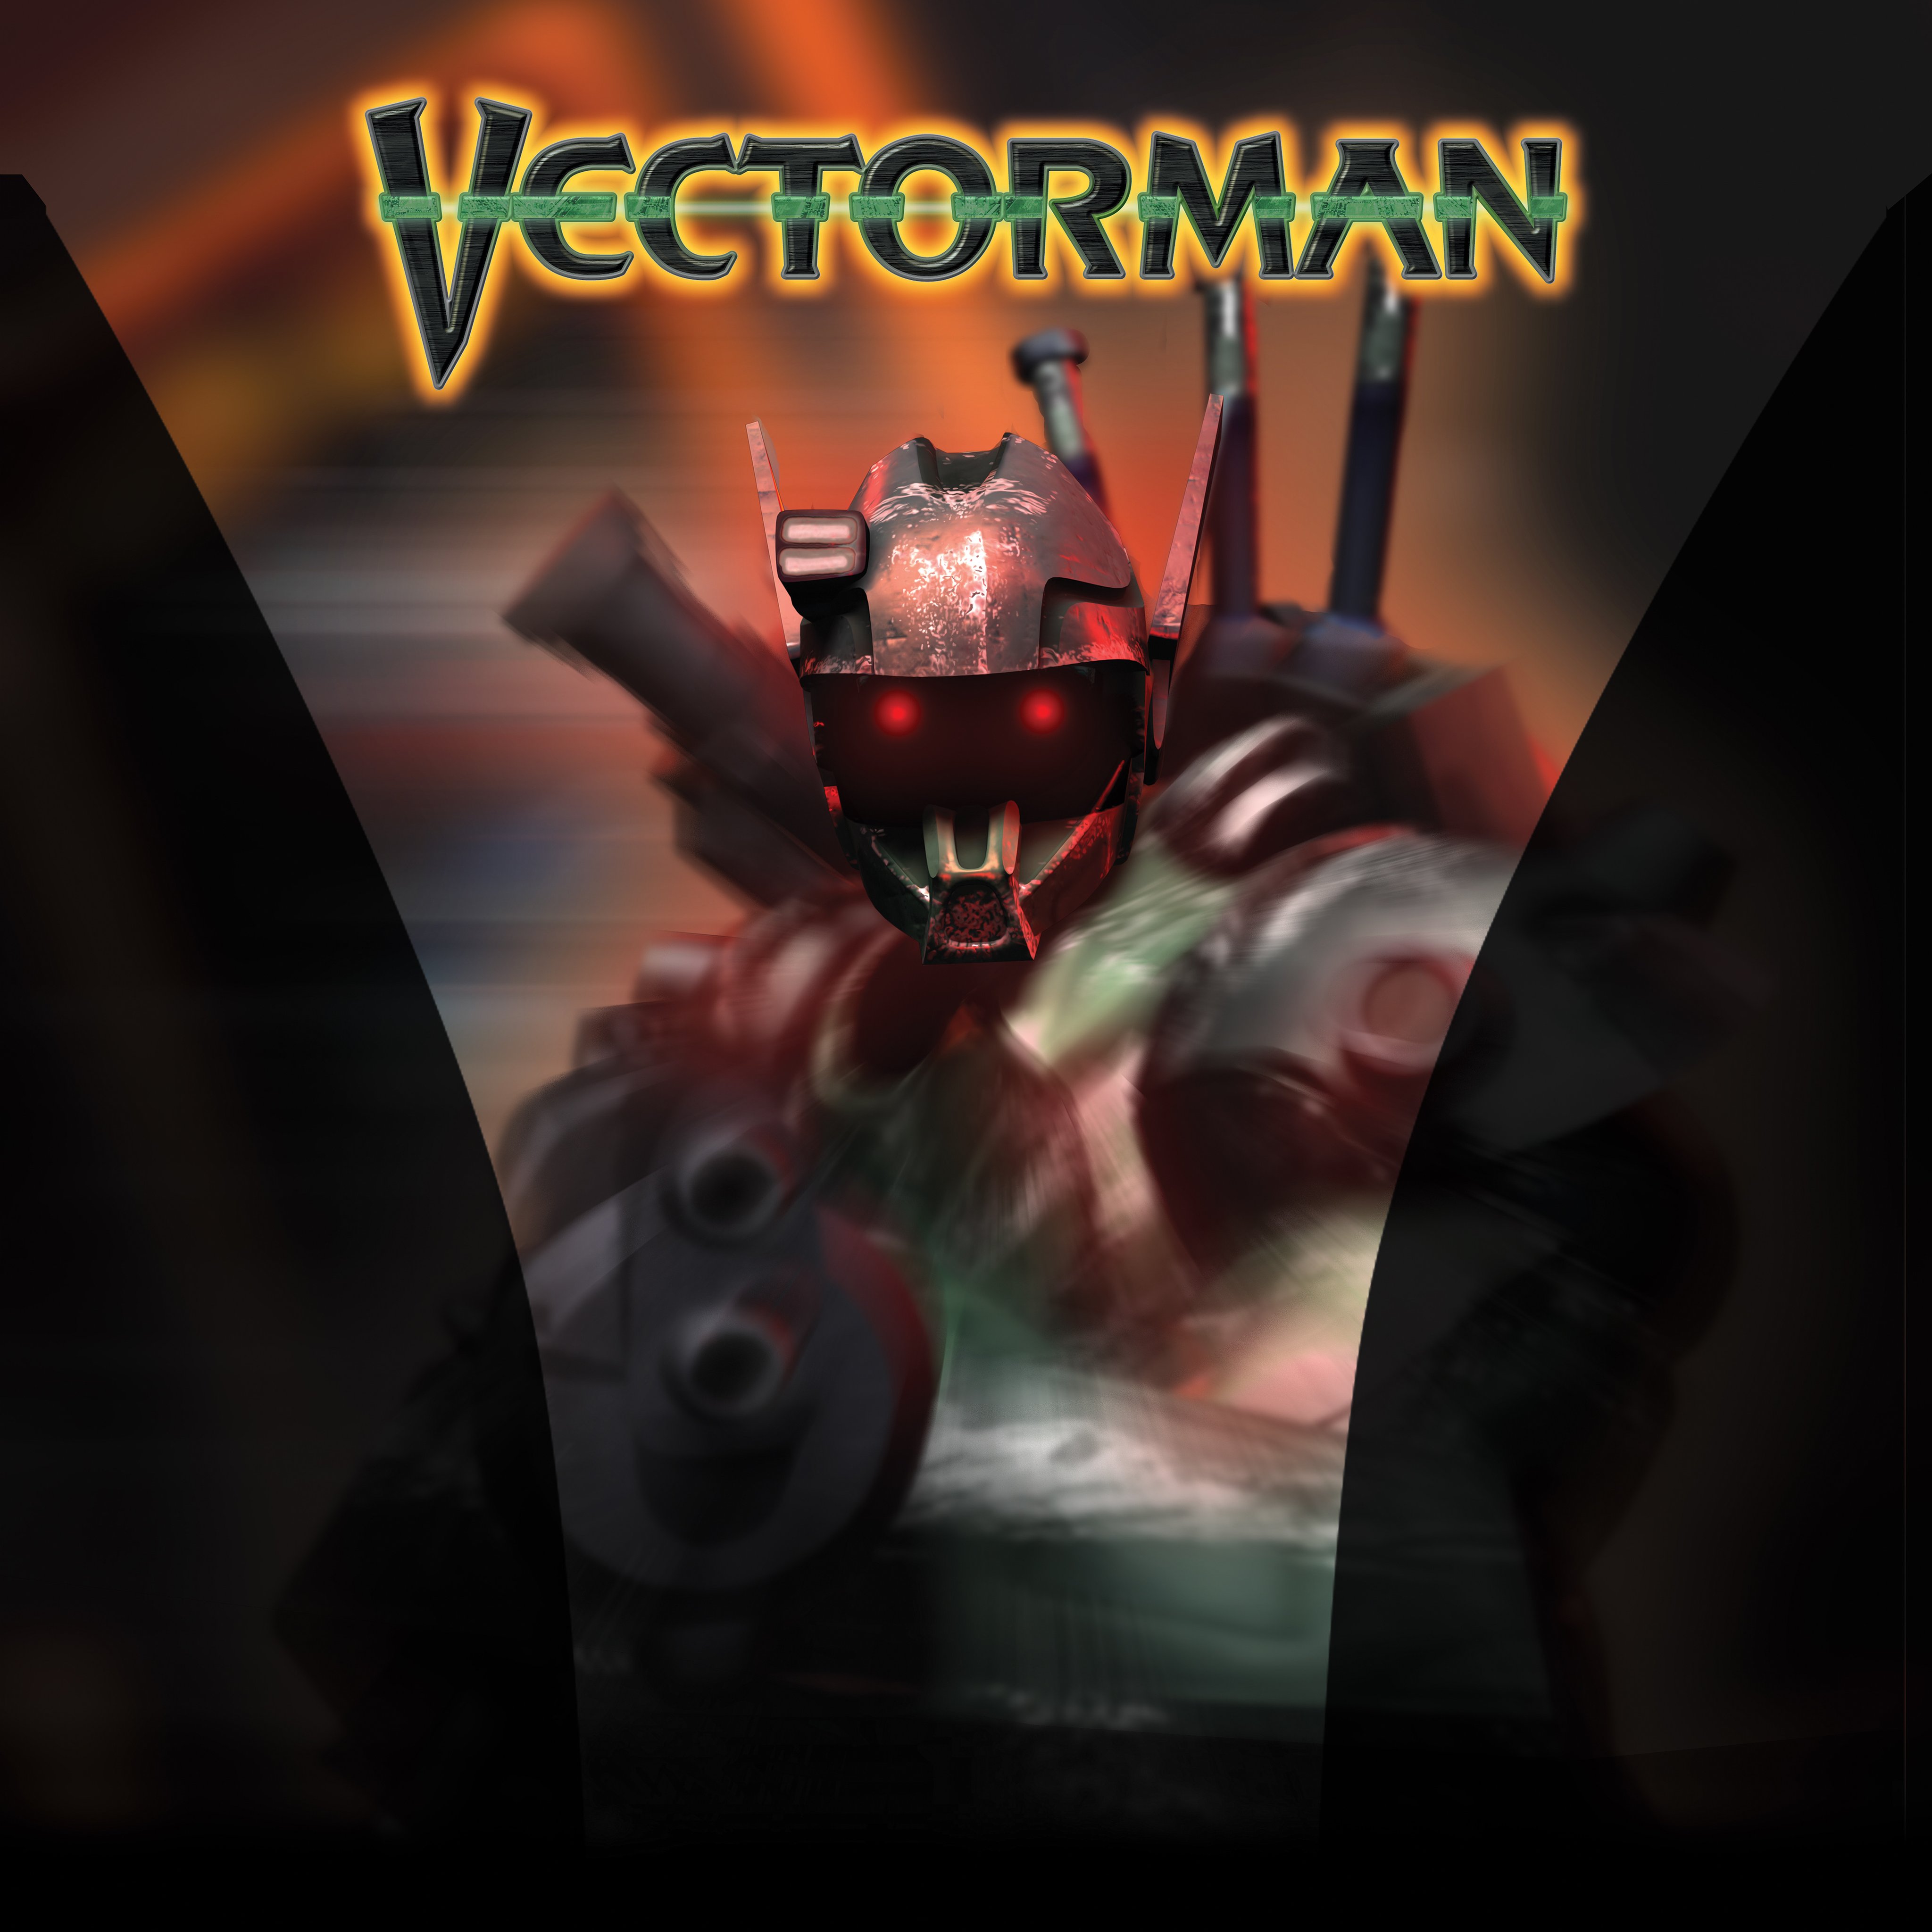 Vectorman - Vectorman (found builds of unfinished PlayStation 2 platformer; early 2000s)